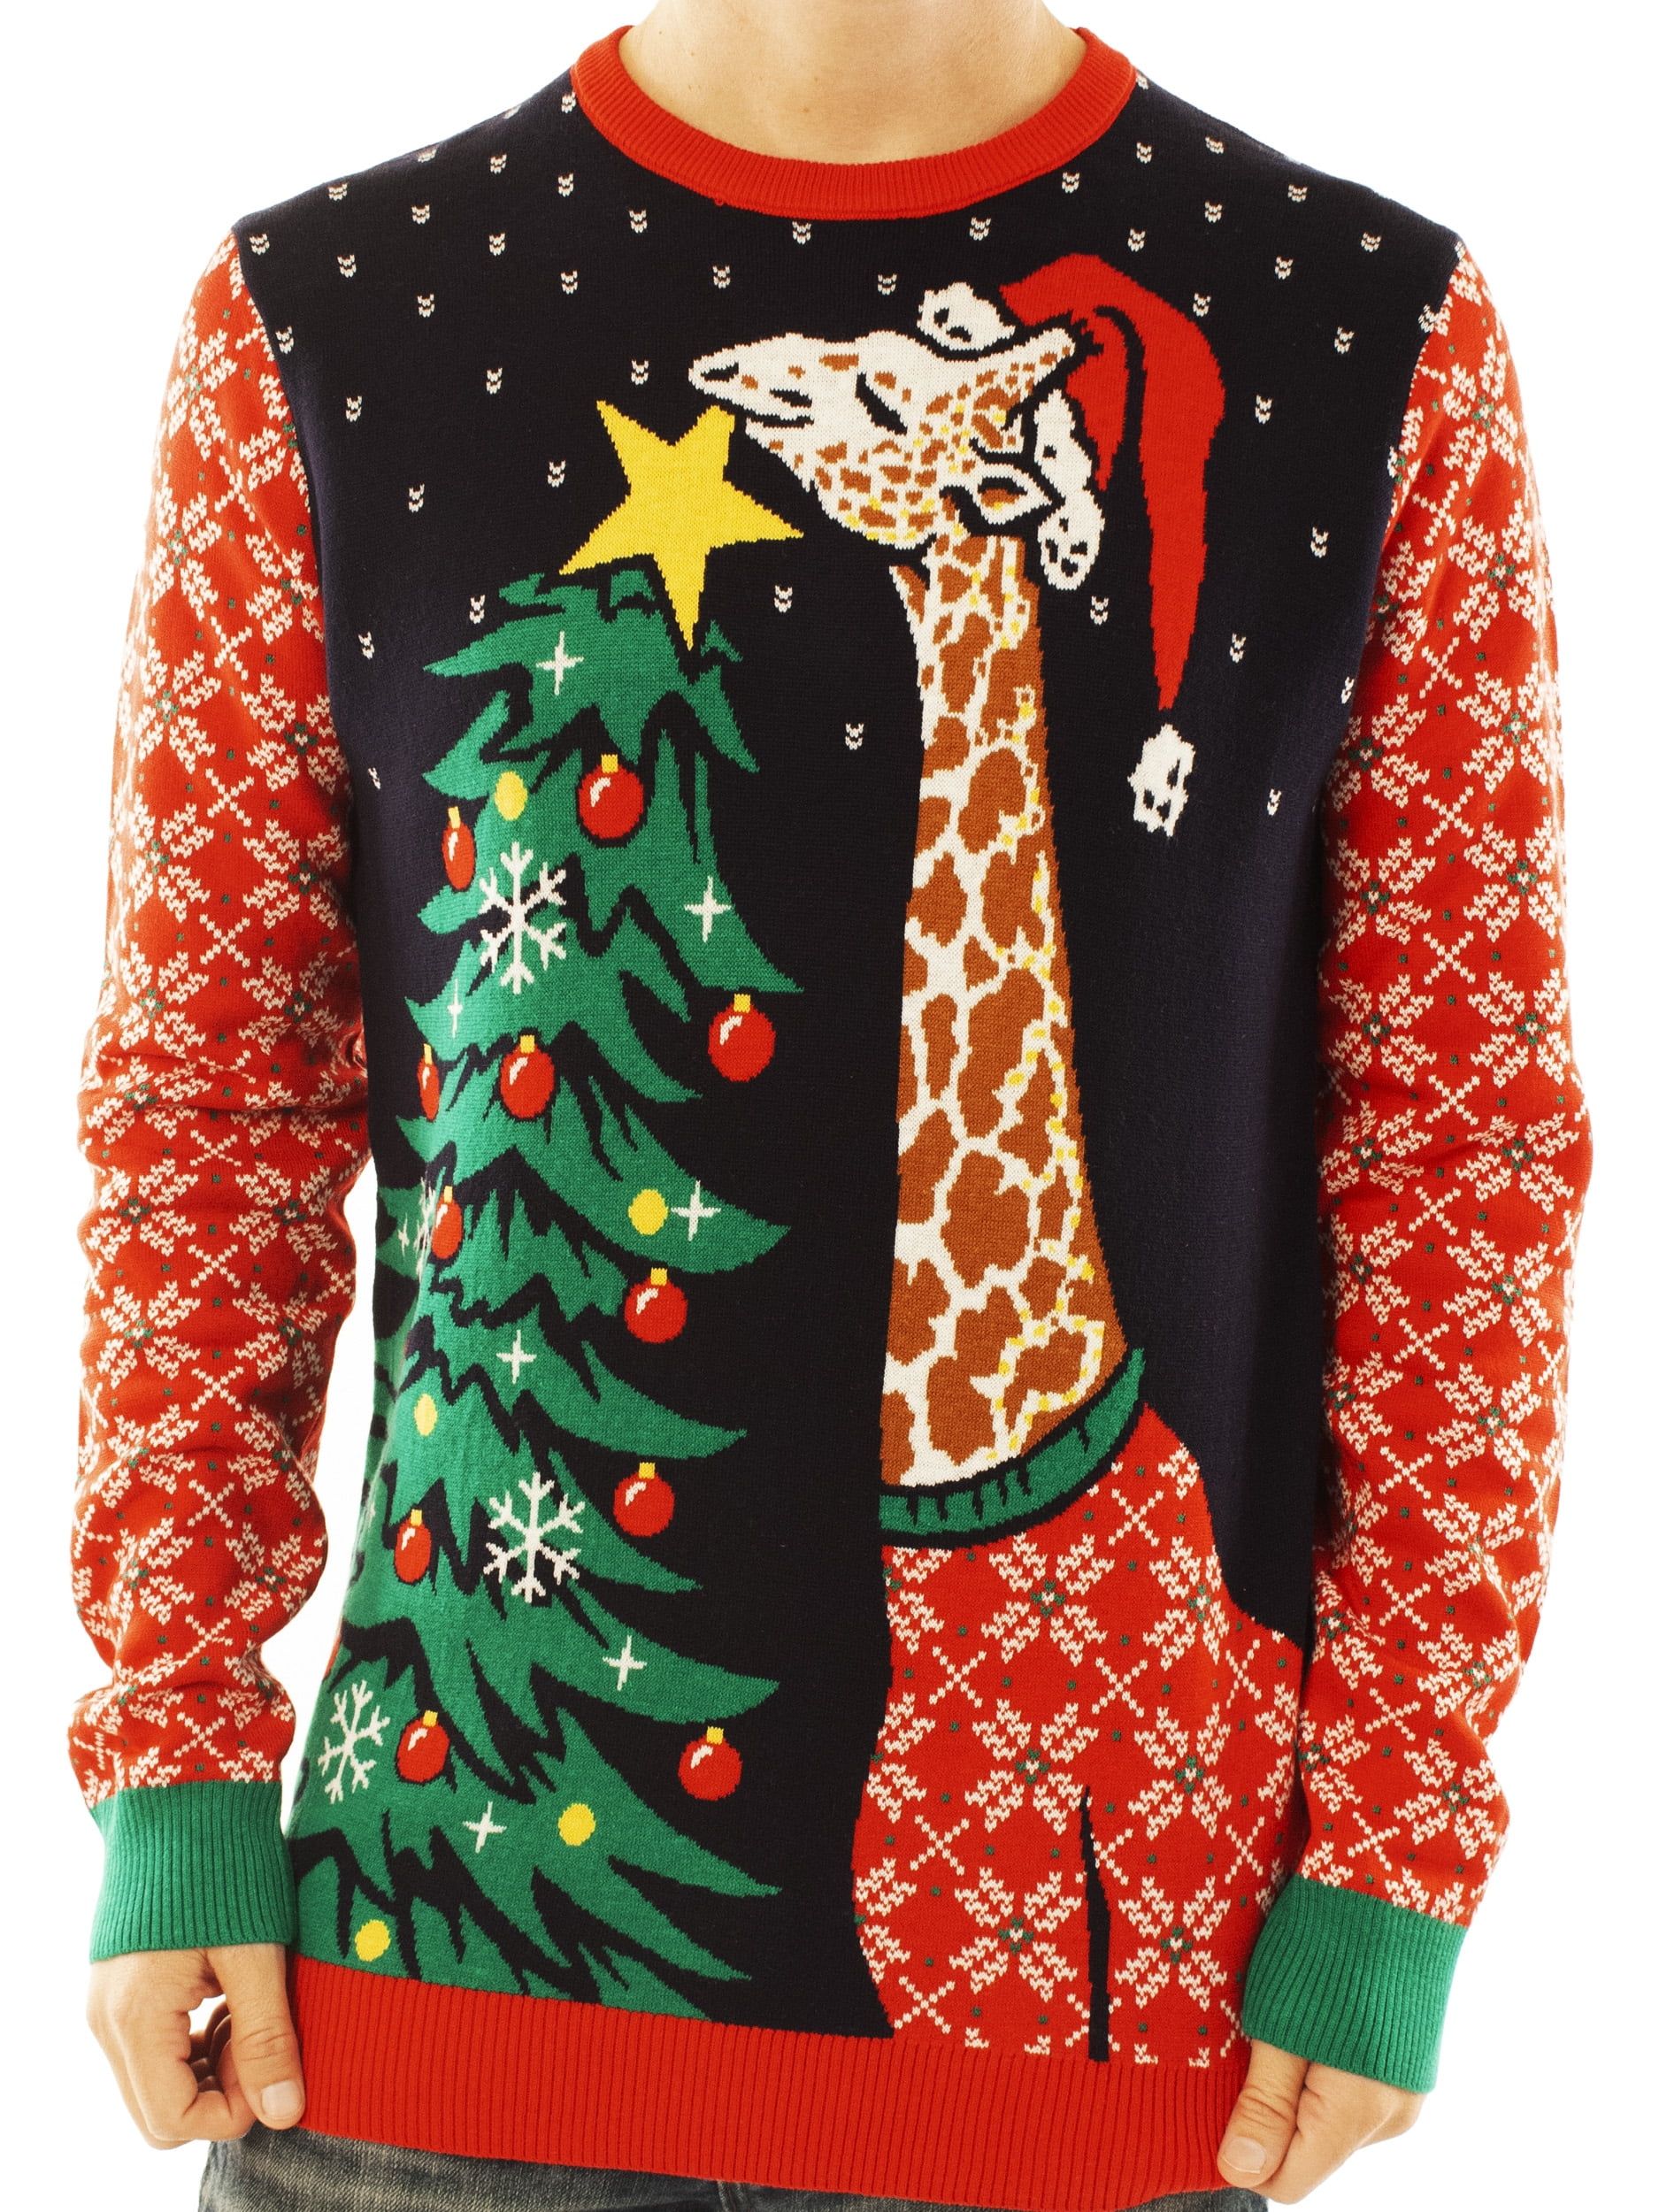 Ugly Christmas Party Sweater Unisex Men's Giraffe Hanging Star On Tree-Small | Walmart (US)